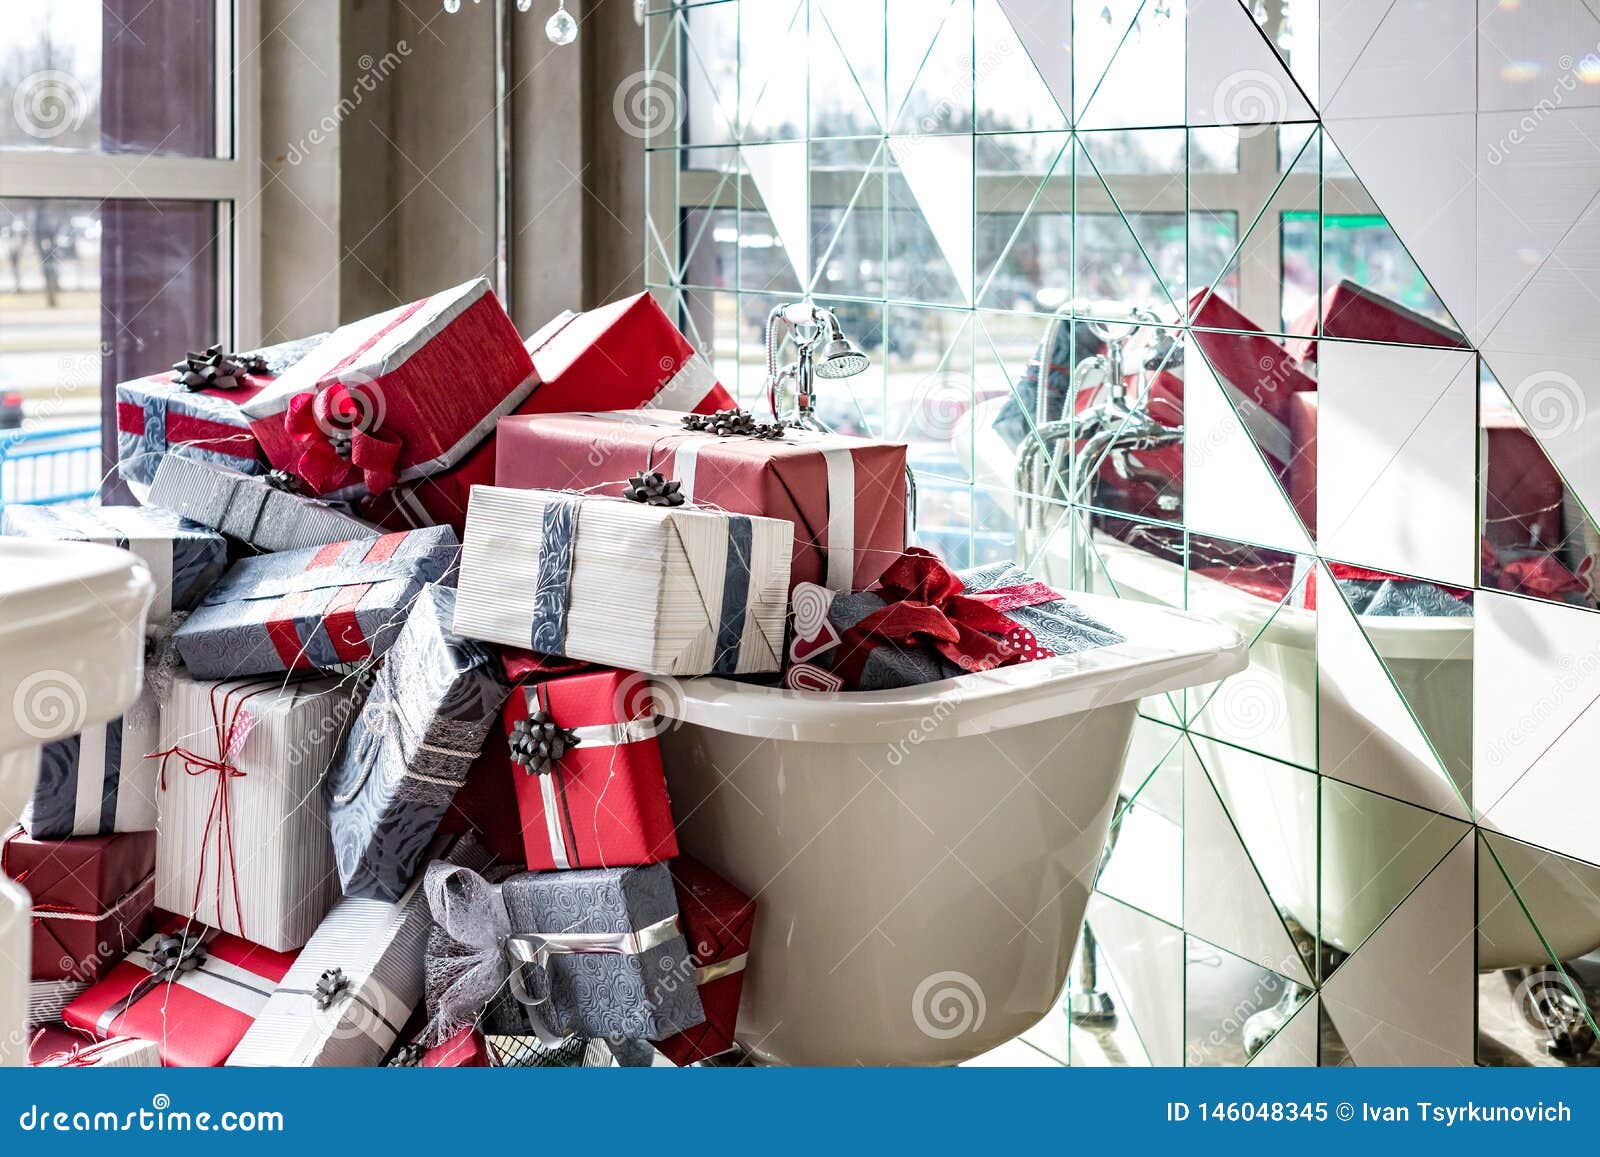 Full Bath Of Gifts In A Luxury Plumbing Shop Stock Image